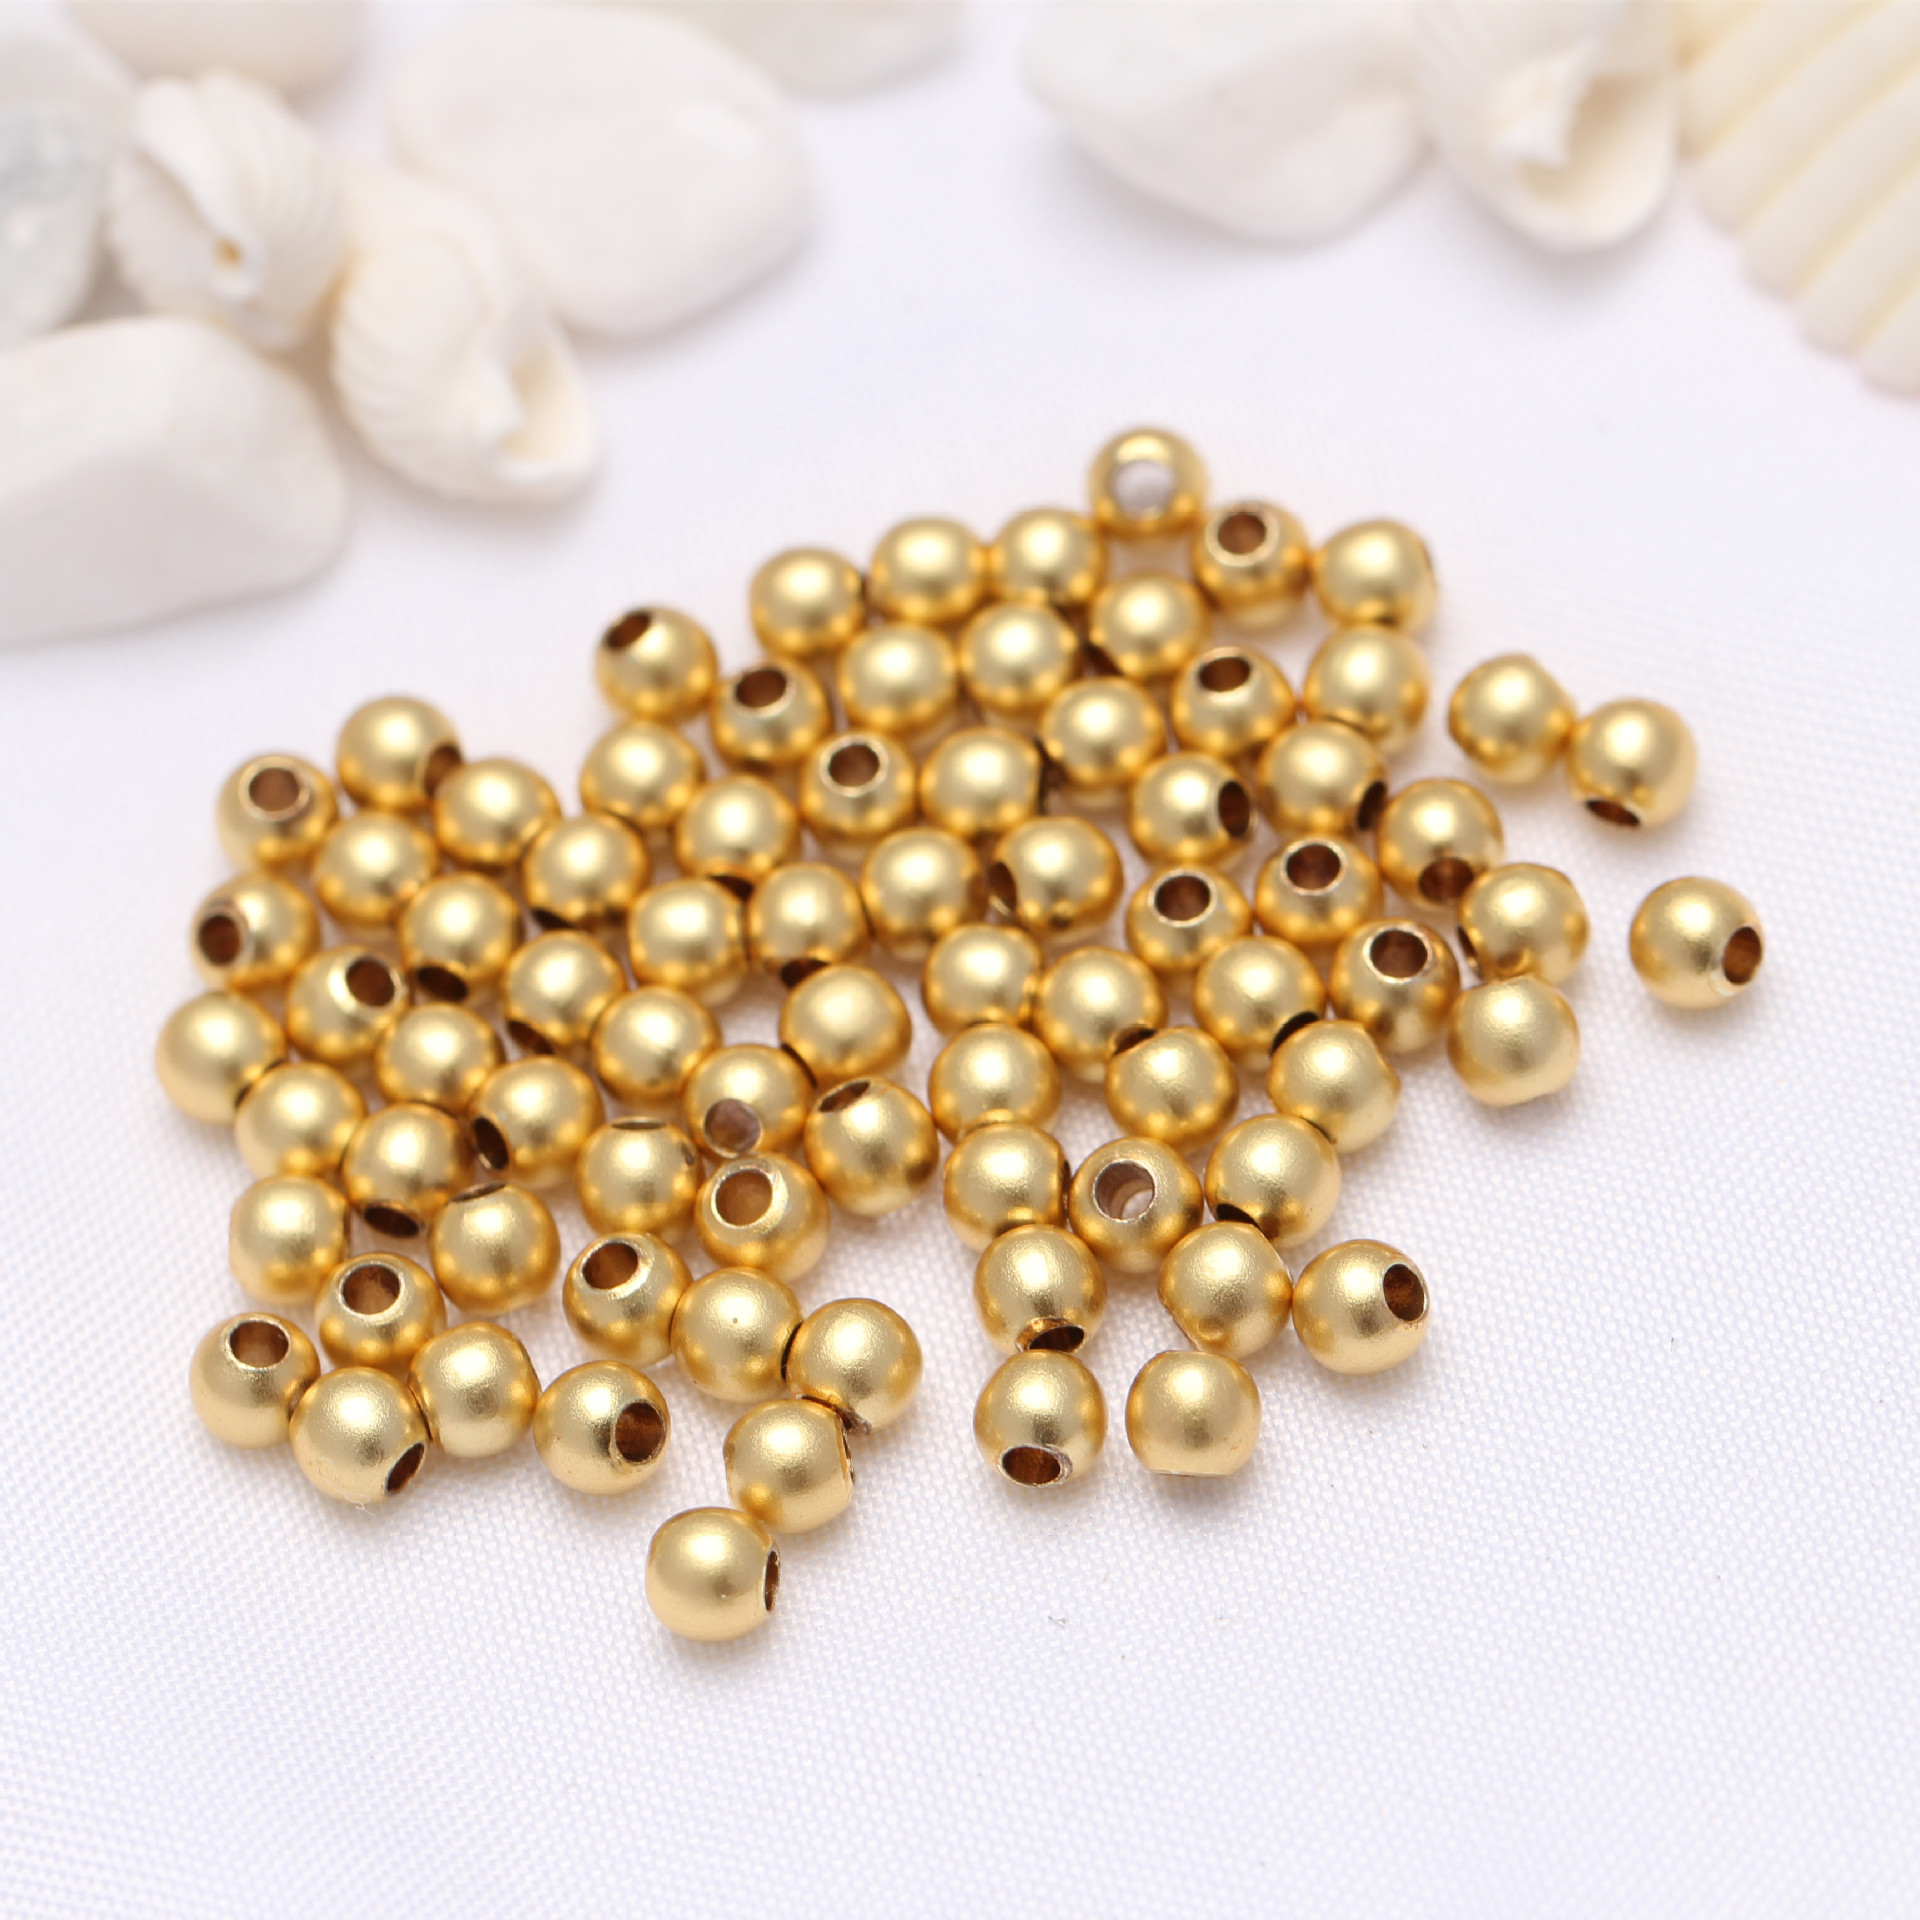 A-82 Color Preserving Sand Gold Loose Bead 4.0mm